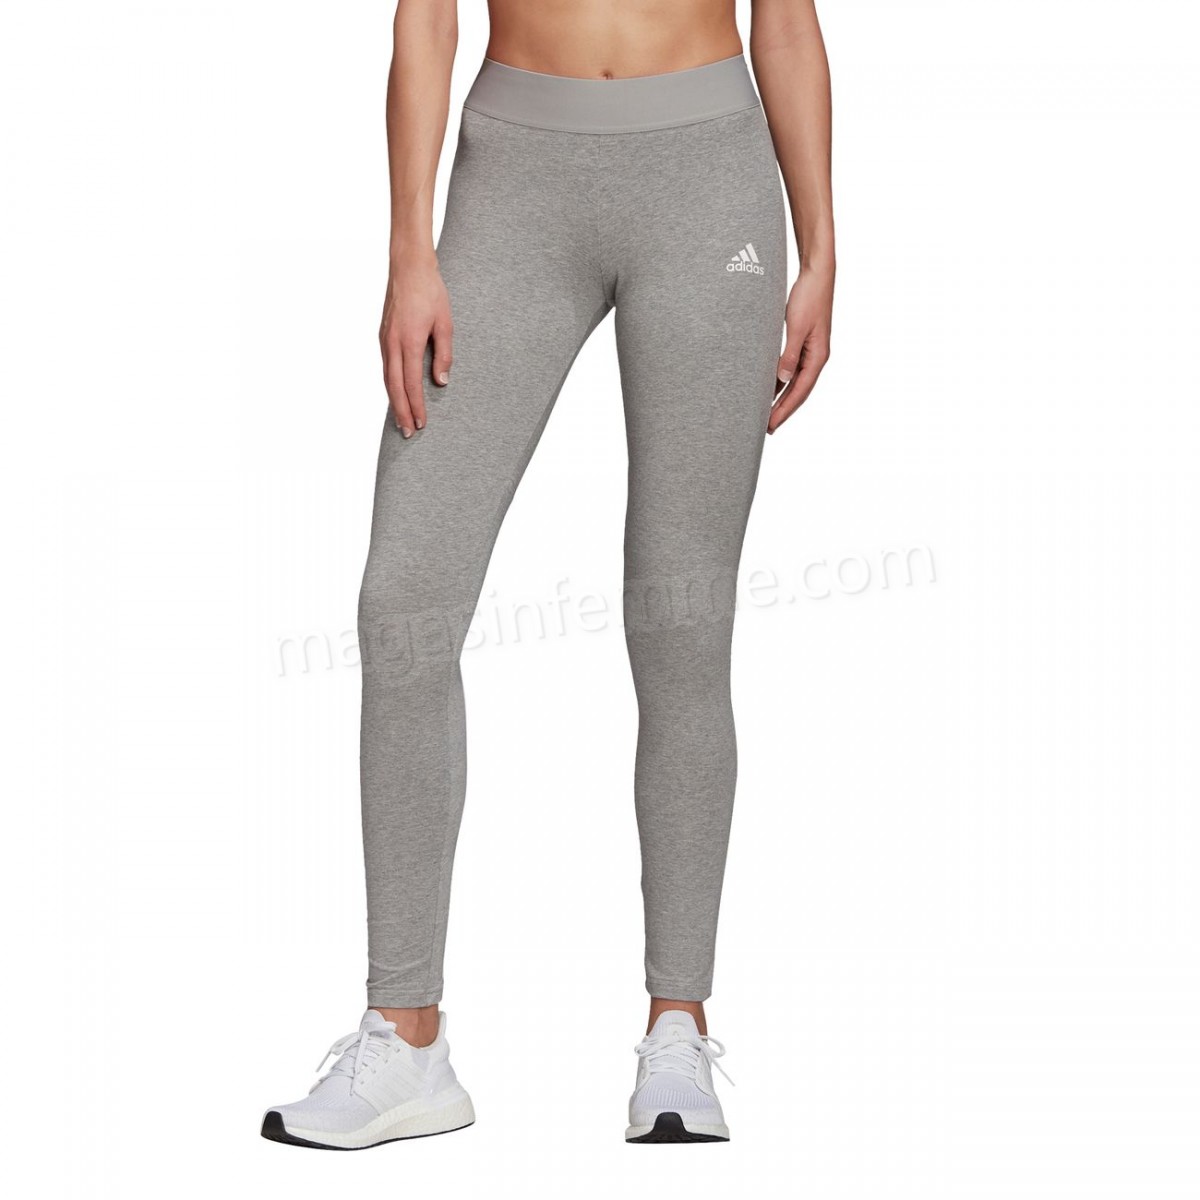 Adidas-Fitness femme ADIDAS Collant femme adidas Must Haves 3-Stripes en solde - -2